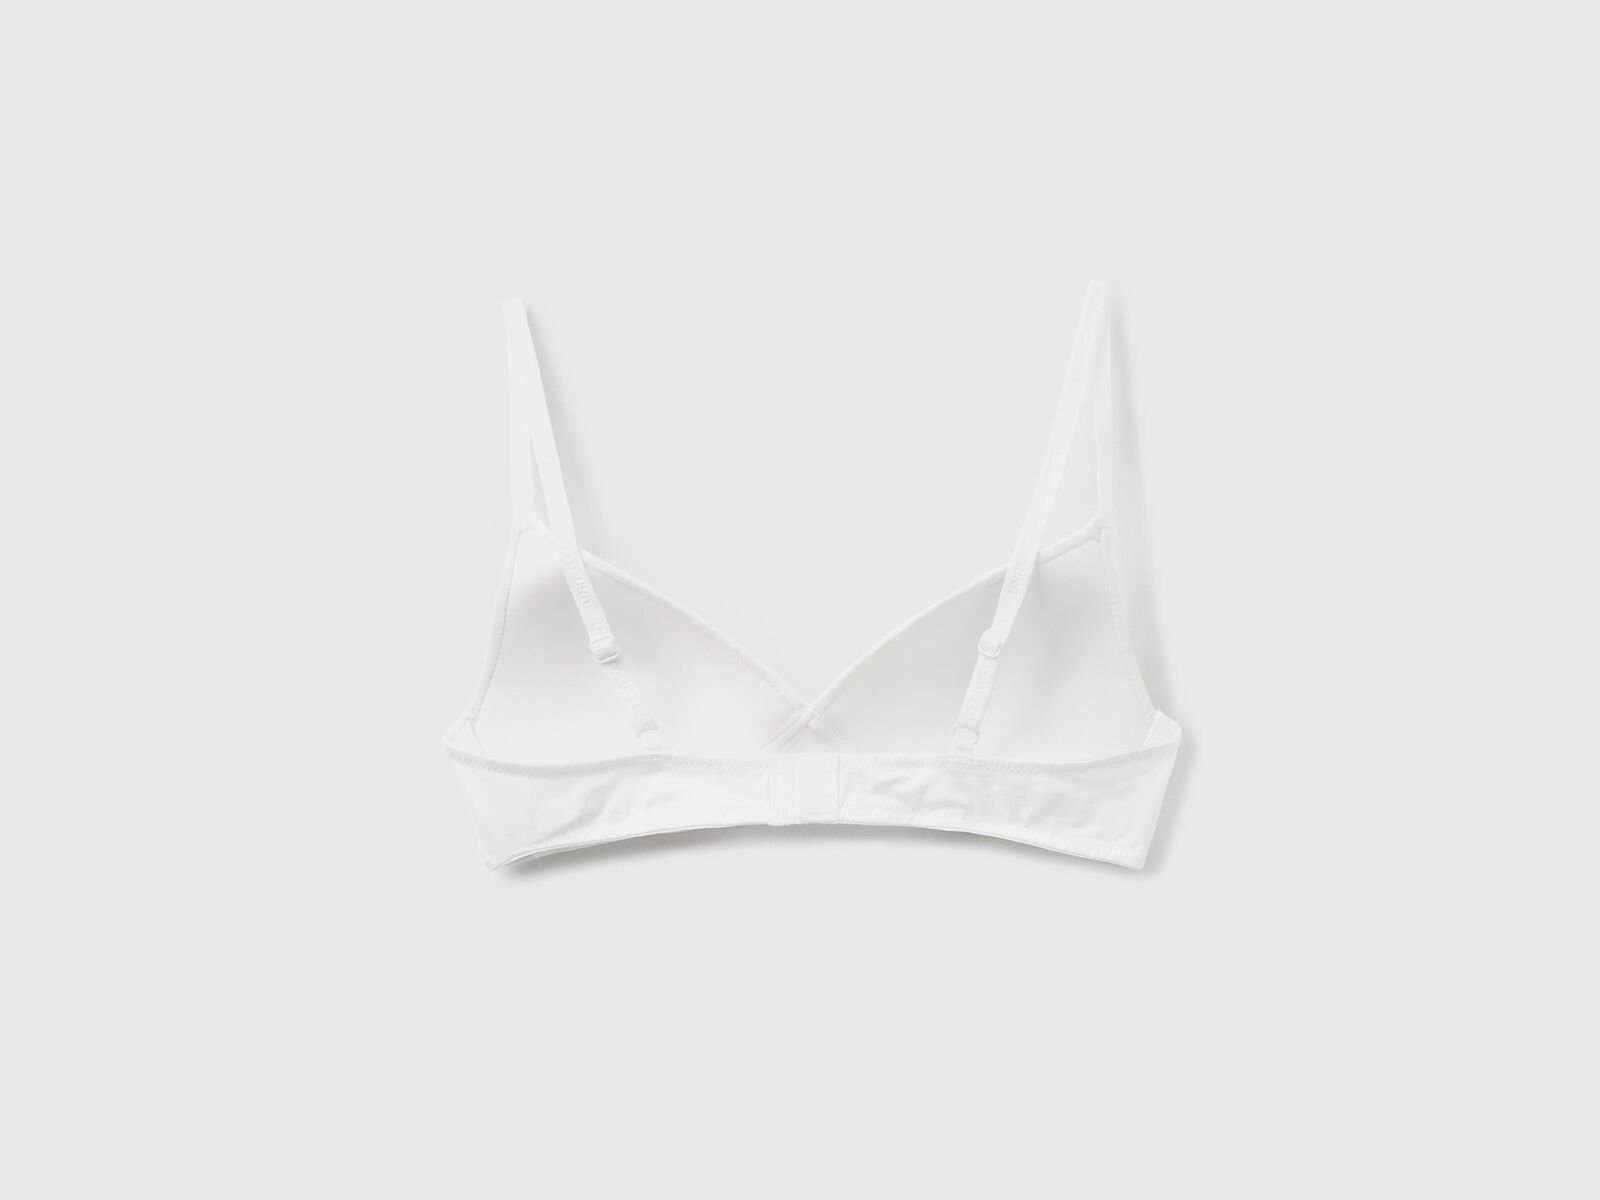 100 Cotton Bra Nude Women Lingerie 34B Bra Size In Cm One Strap Bra White  Sports Crop Top Light Support Sports Bra Non Wired Padded Bra Satin  Lingerie Sets Light Support Sports